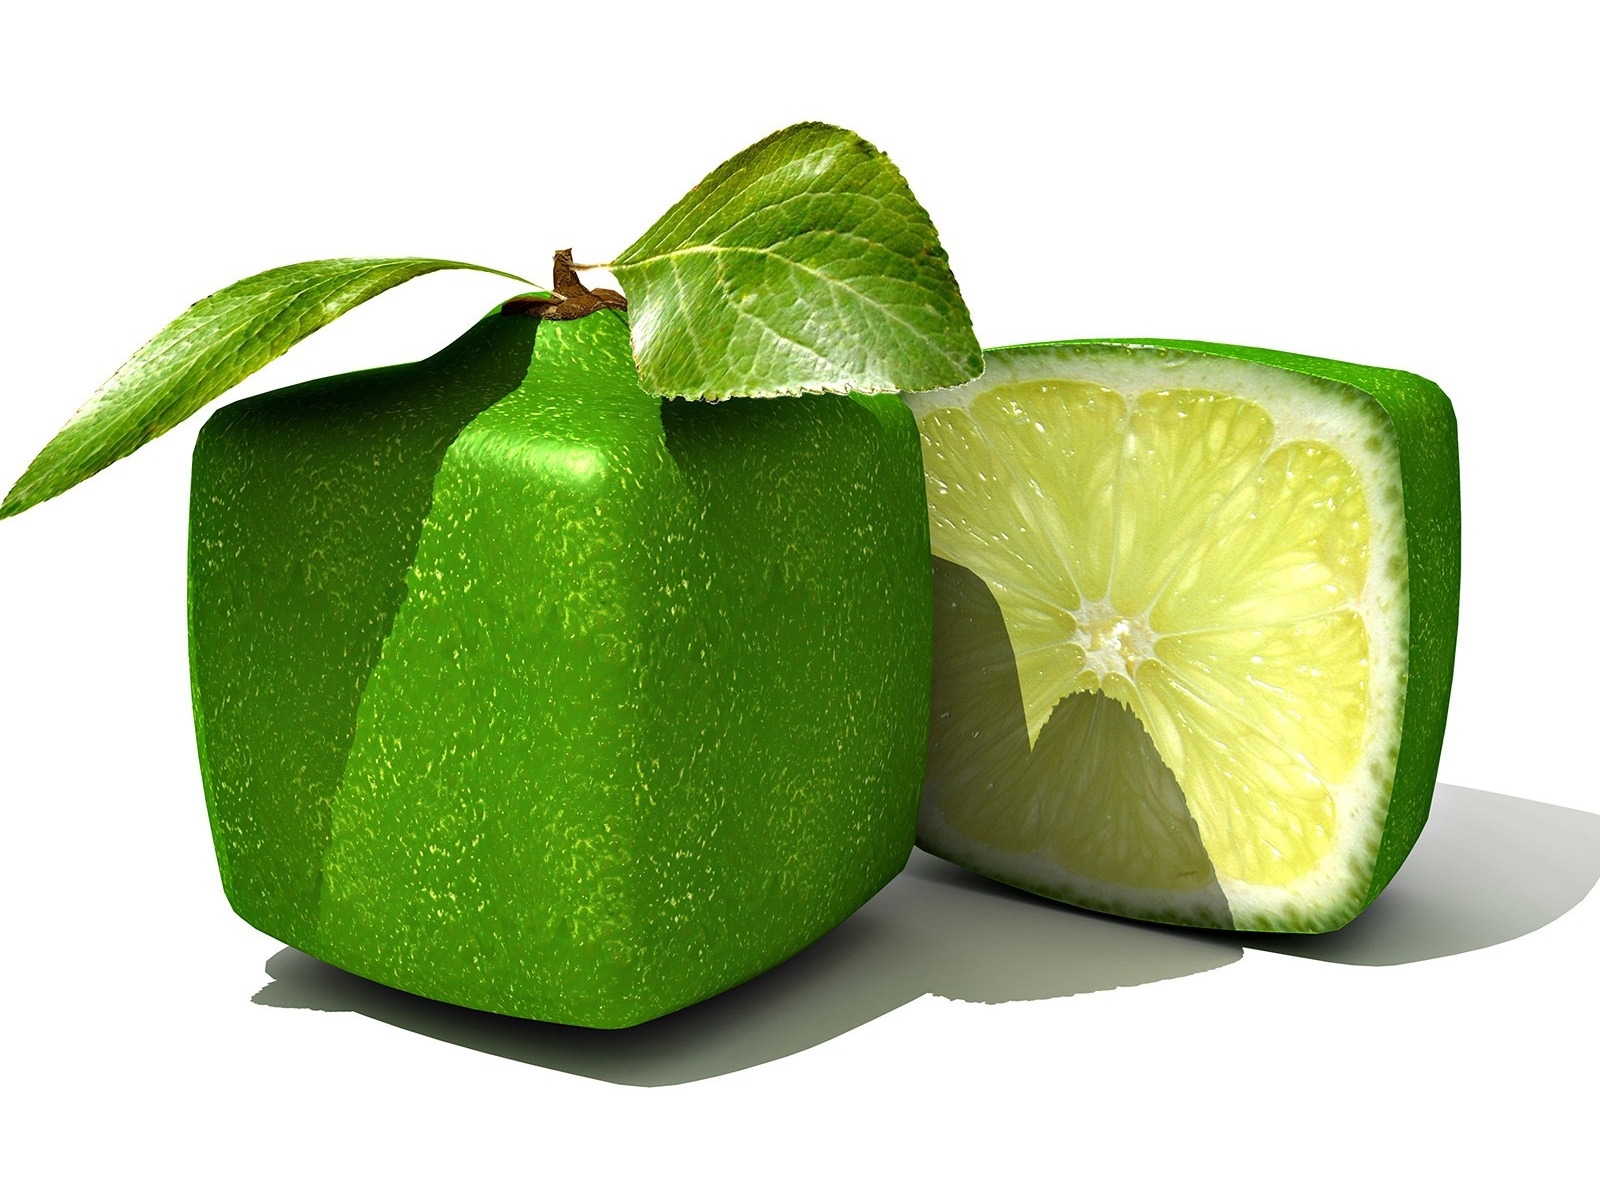 Square Limes for 1600 x 1200 resolution